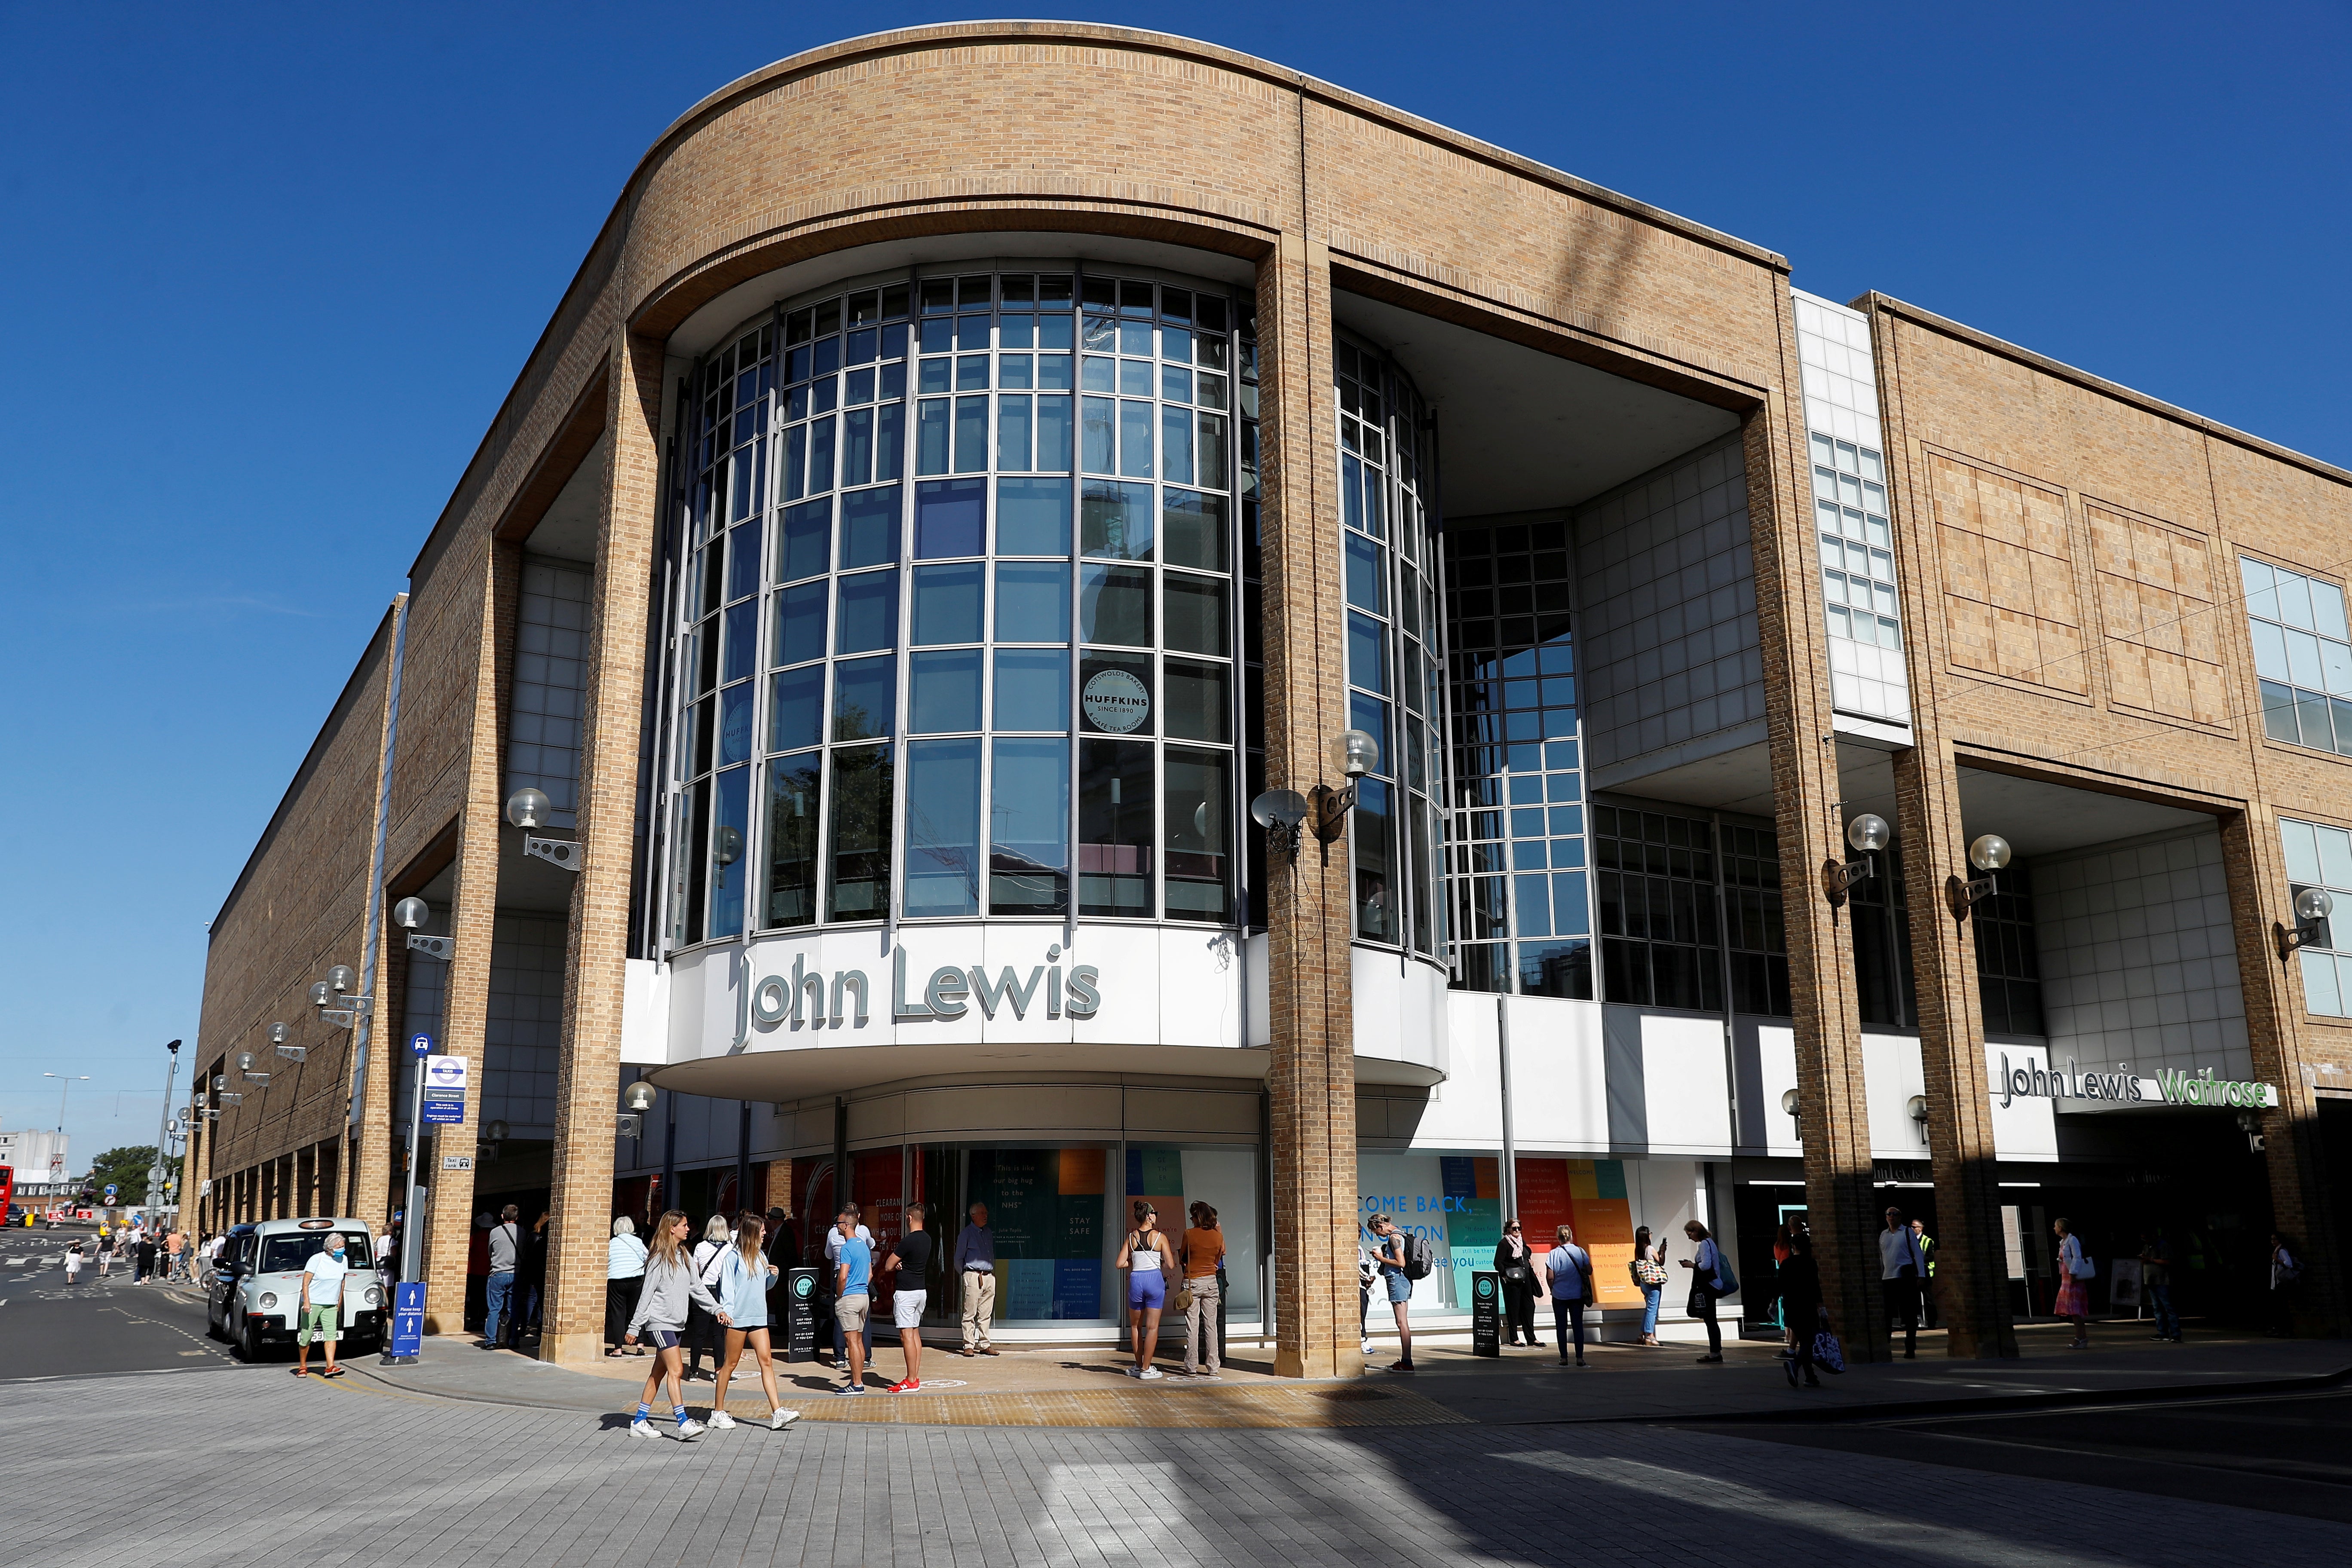 John Lewis scrapped its bonus, closed stores and made hundreds of staff redundant - it is not alone